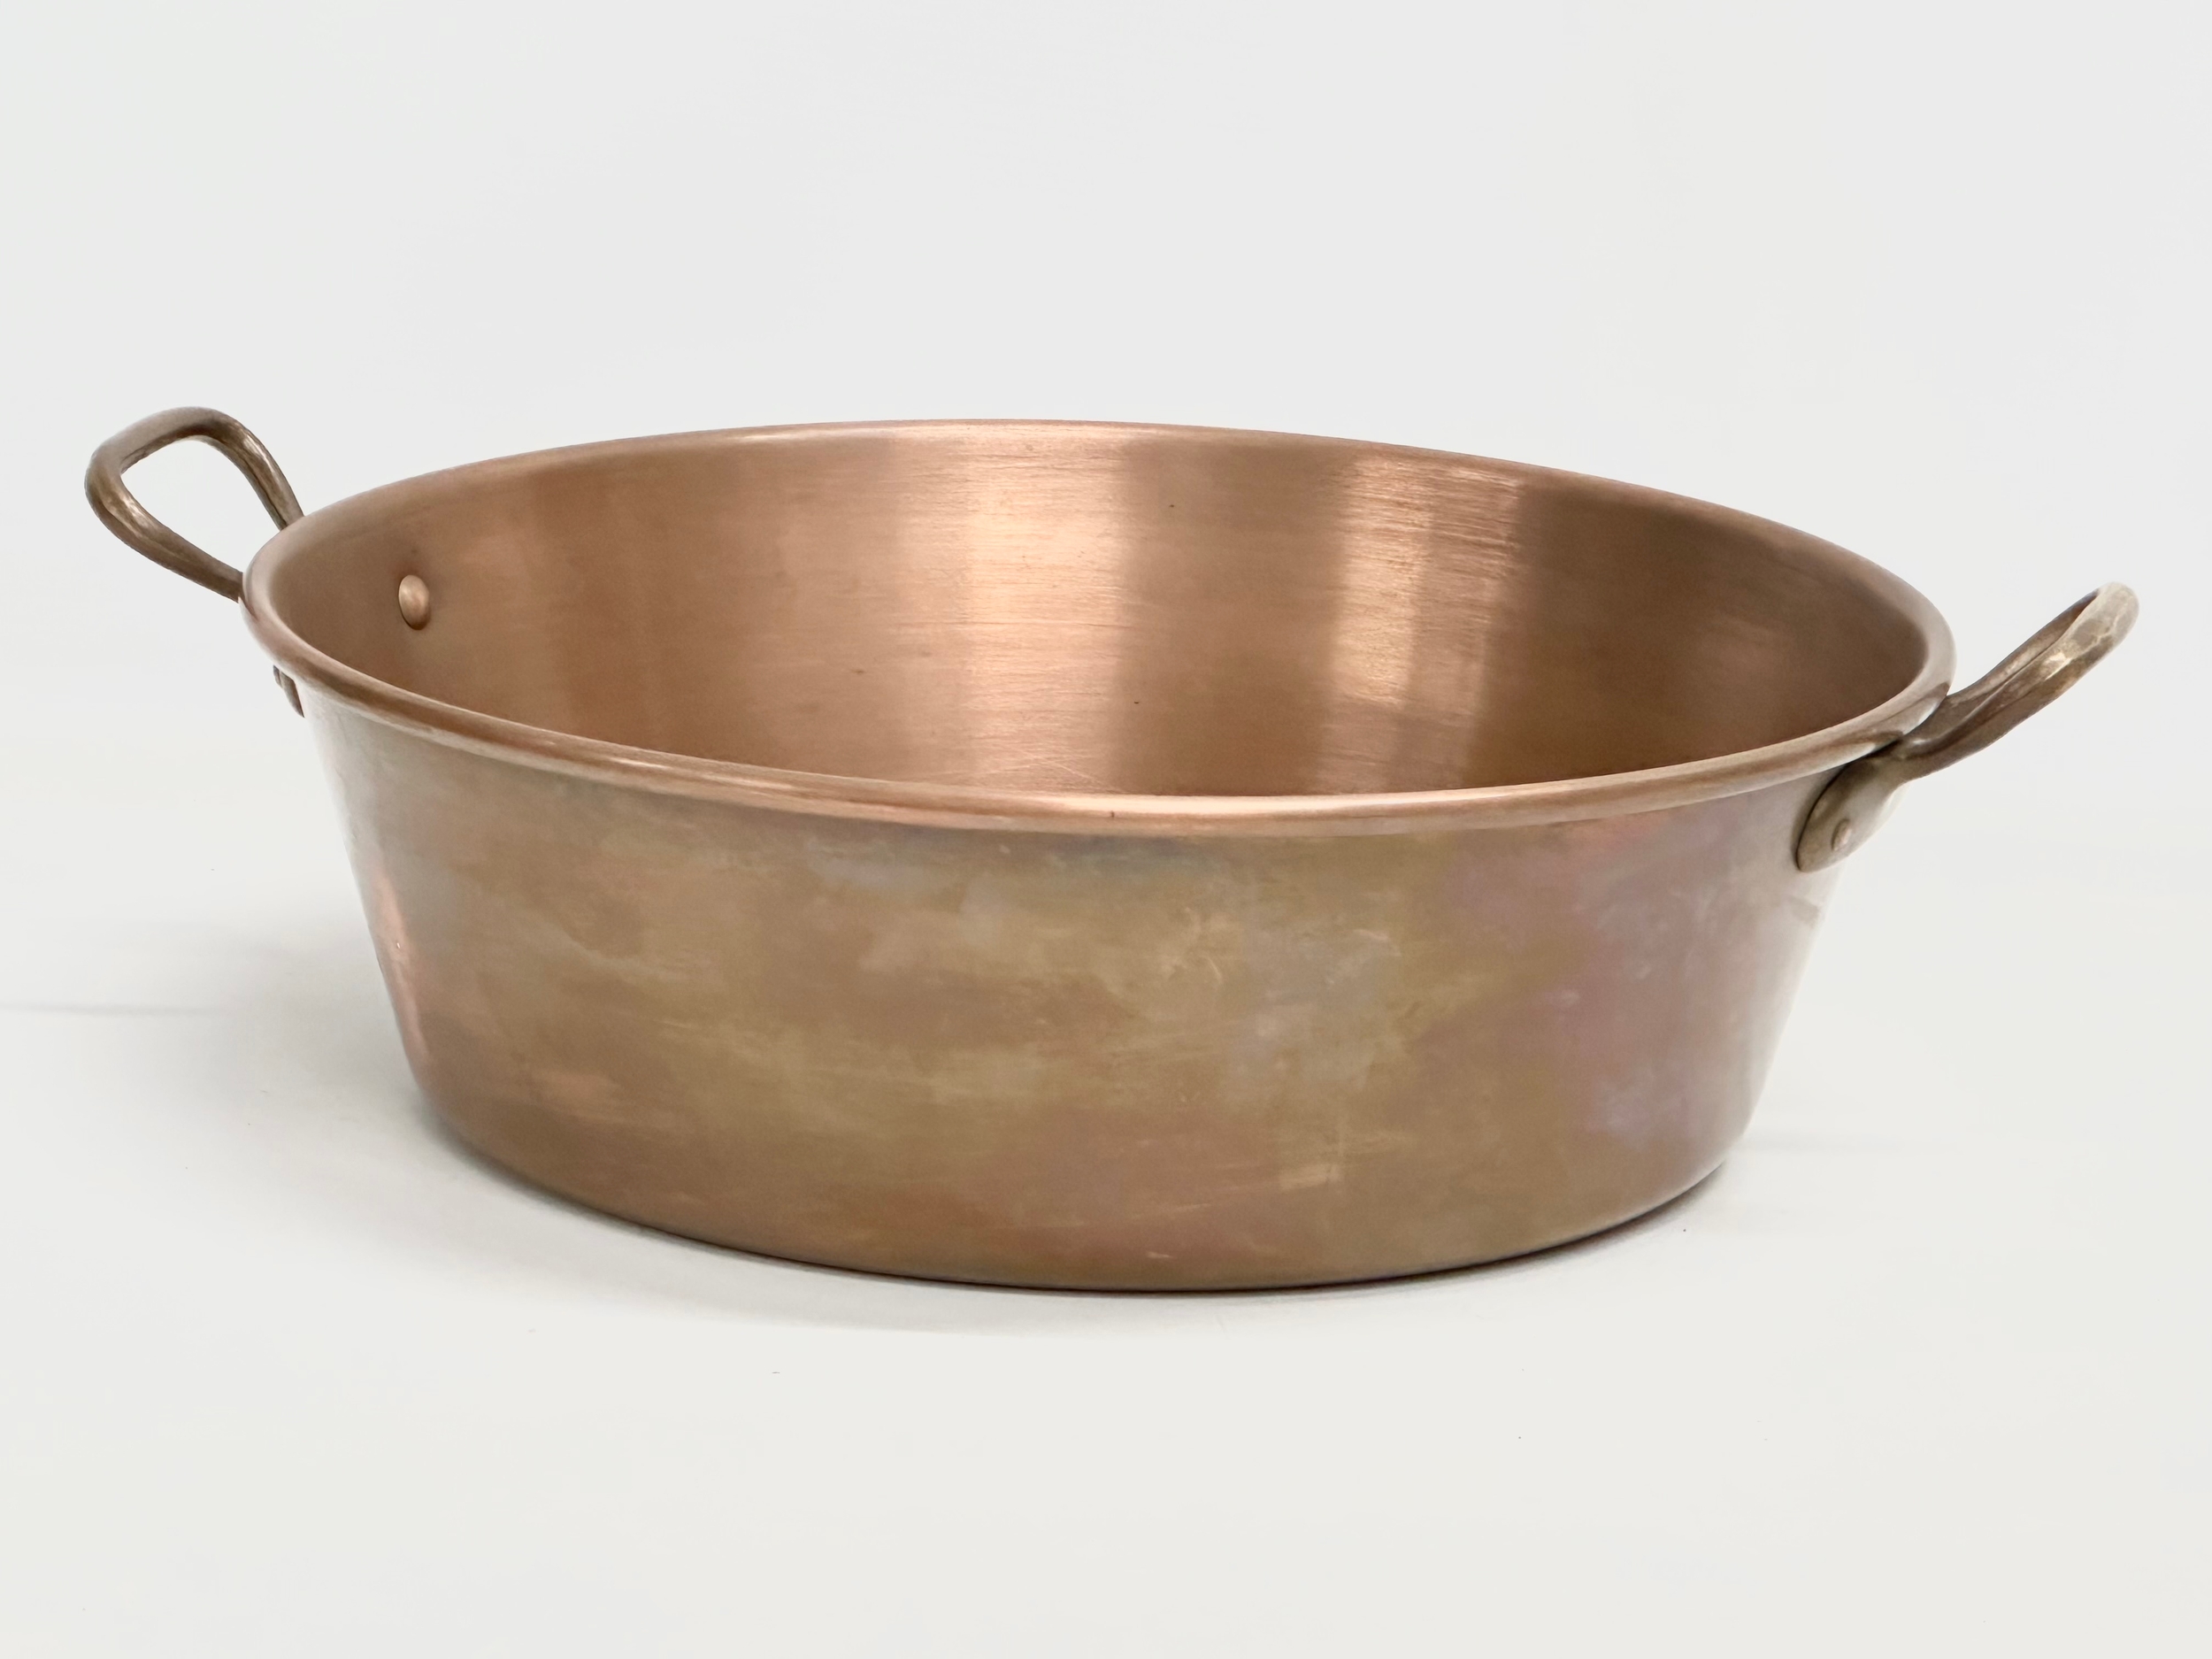 An early 20th century copper jelly pan/jam pan. 45x37x13cm